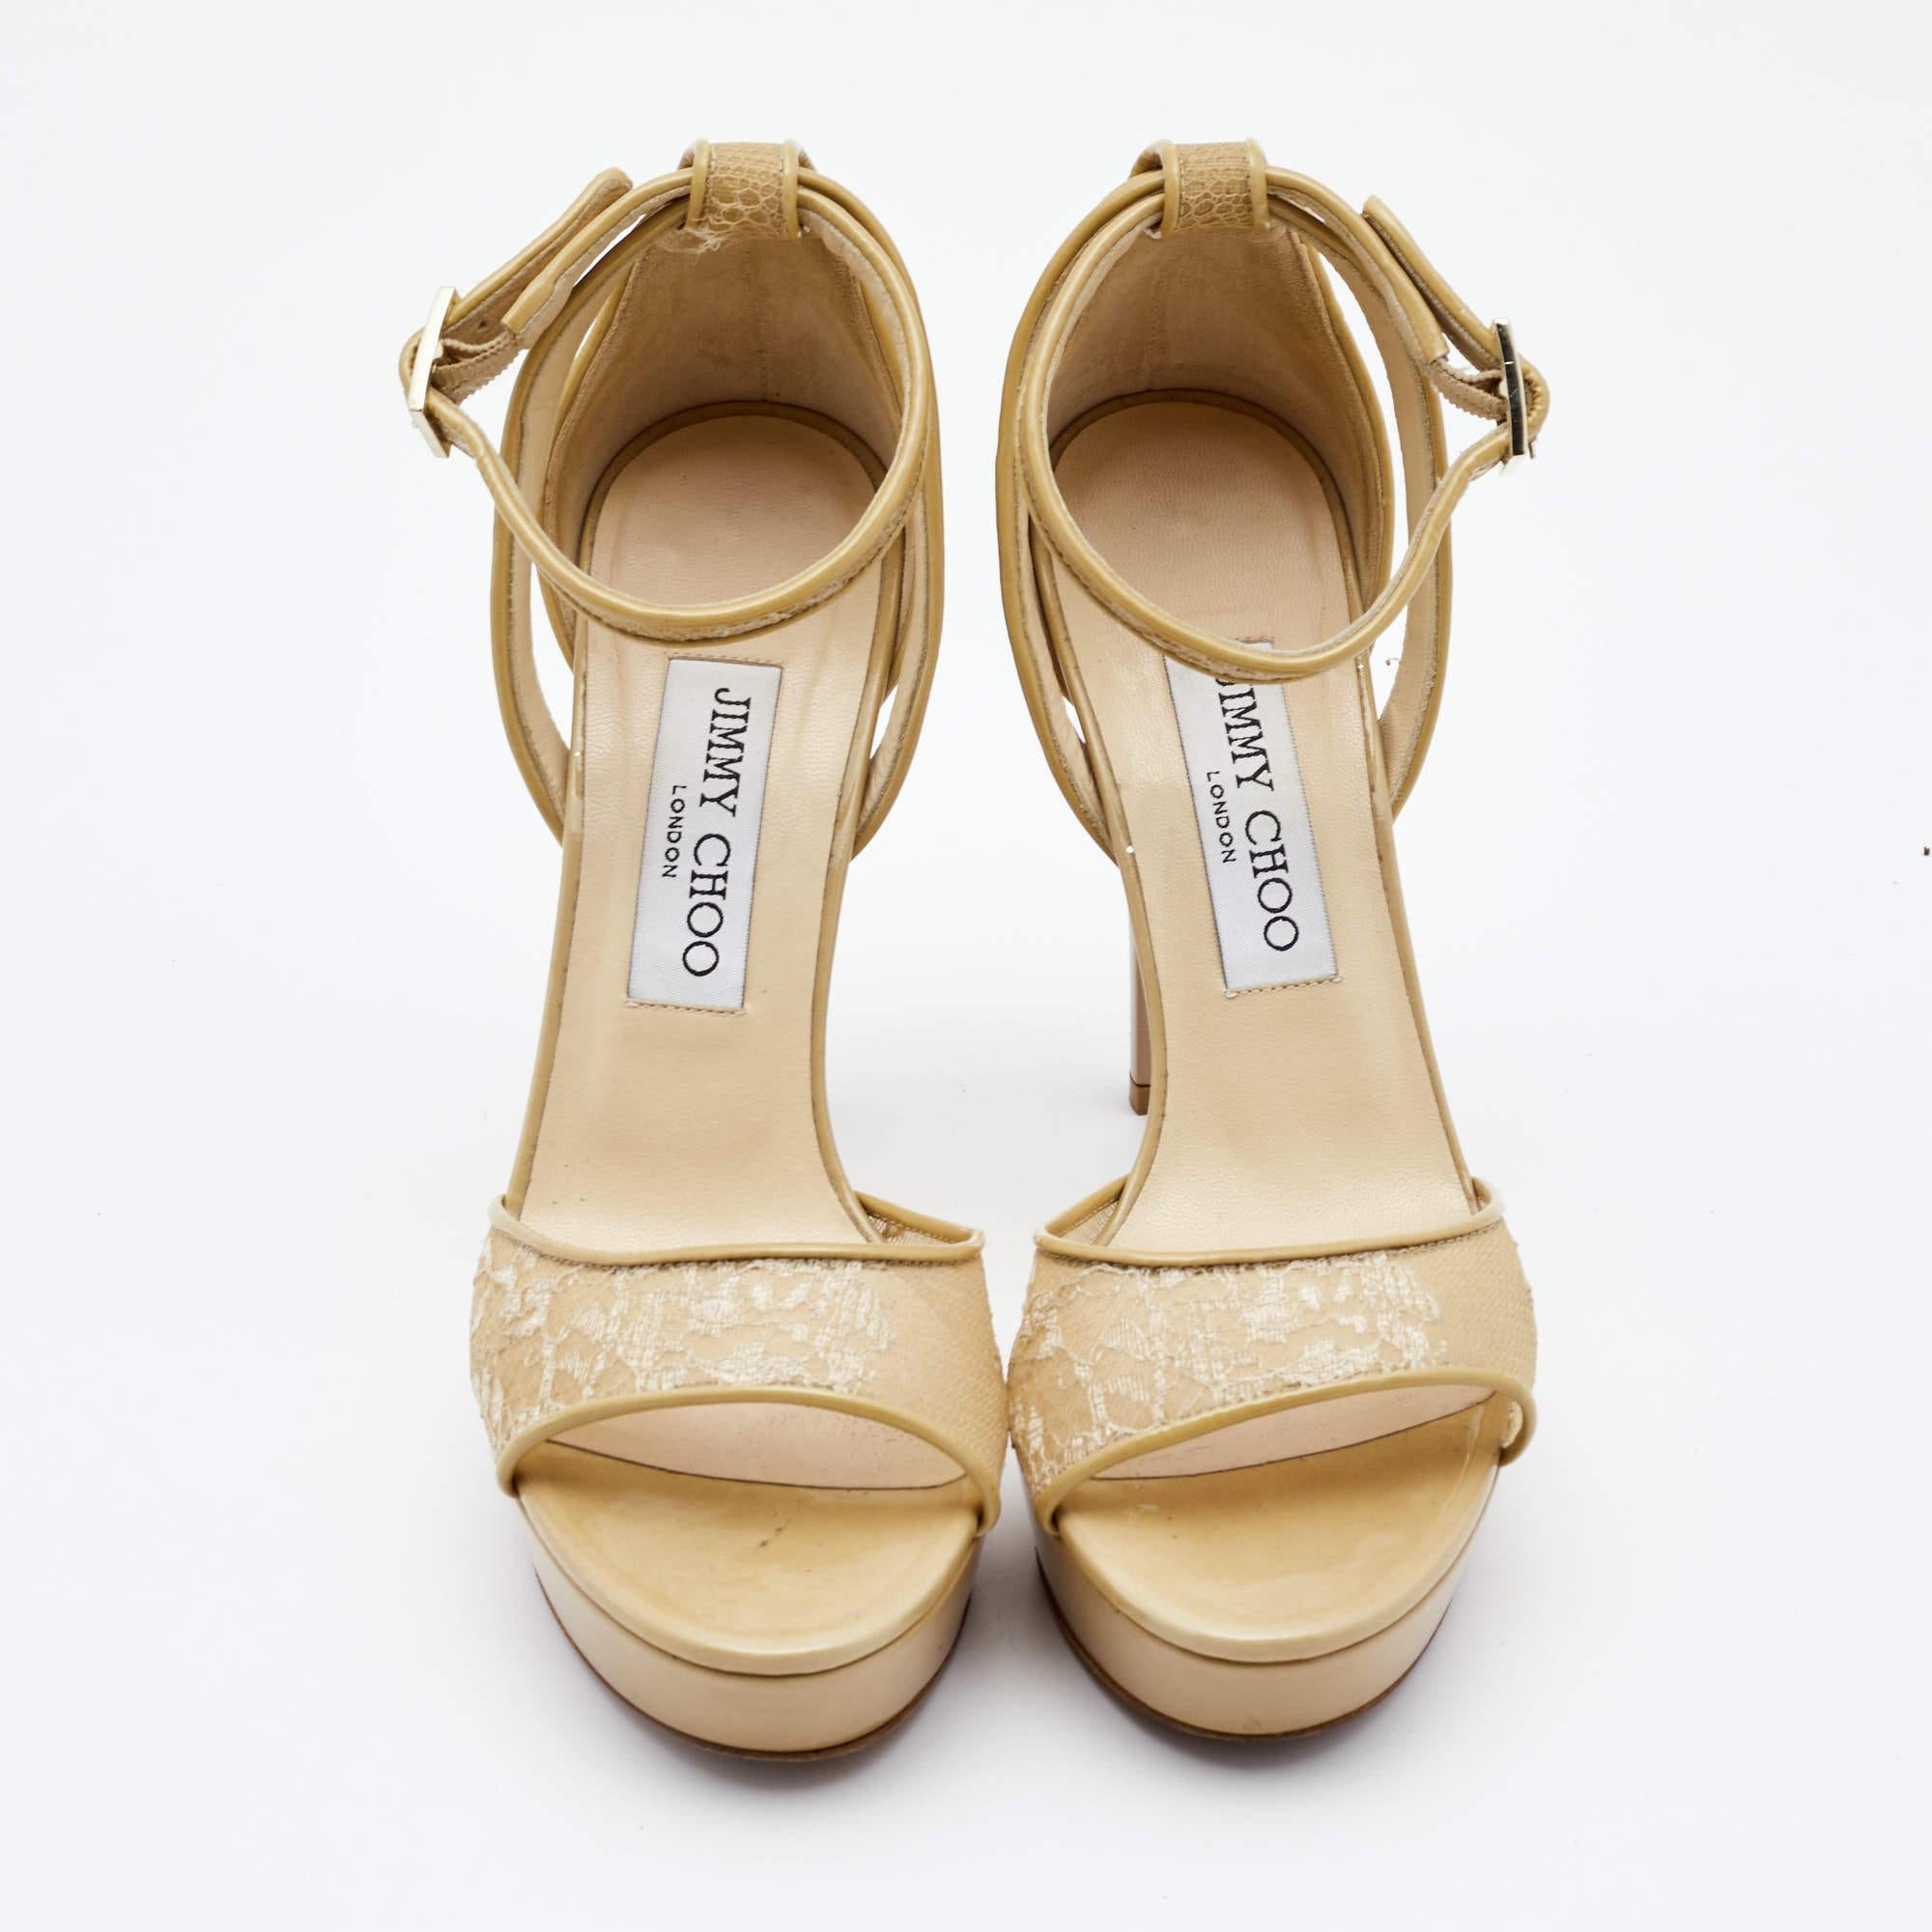 All a woman needs is a little love and a pair of Jimmy Choo sandals to brighten up her day. Elegant beige in color, these Kayden sandals have been crafted from lace and styled with open toes, closed backs with ankle wraps, and 11cm heels. They'll